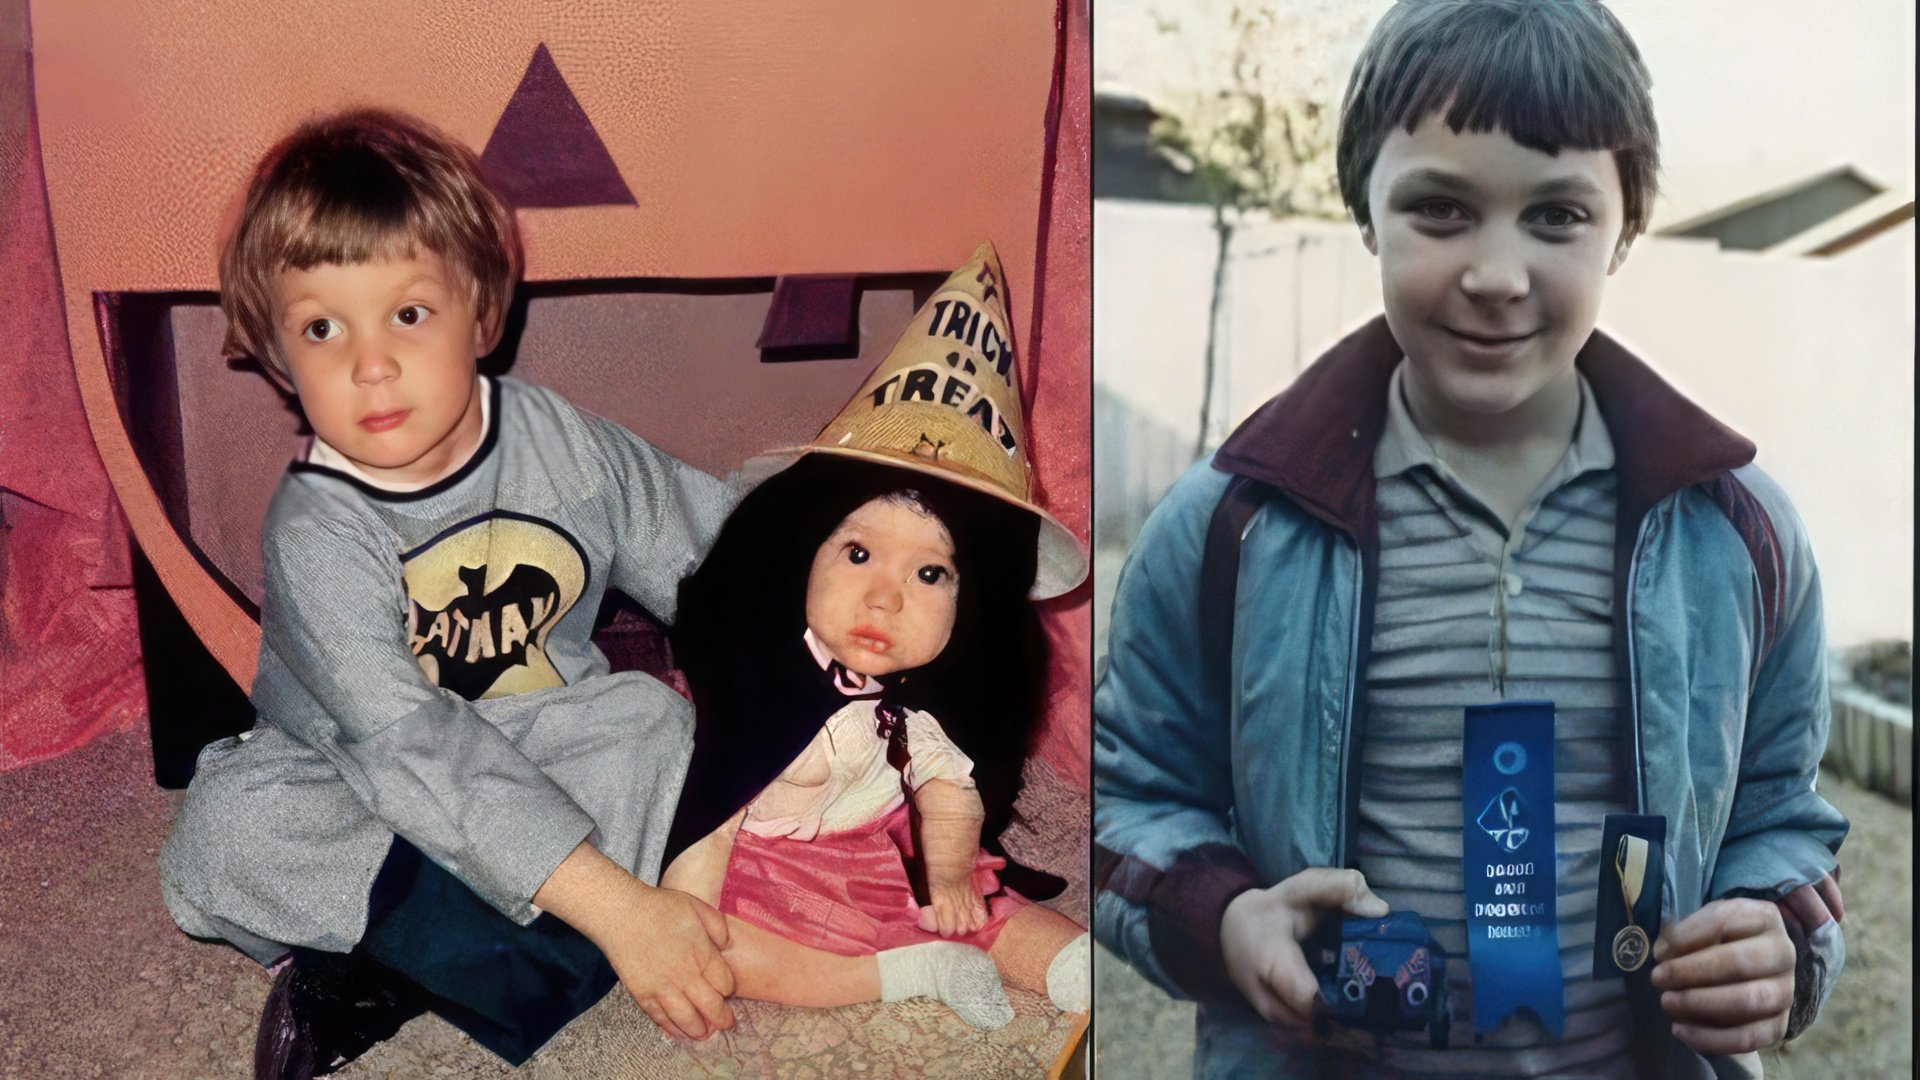 Jim Parsons in his childhood